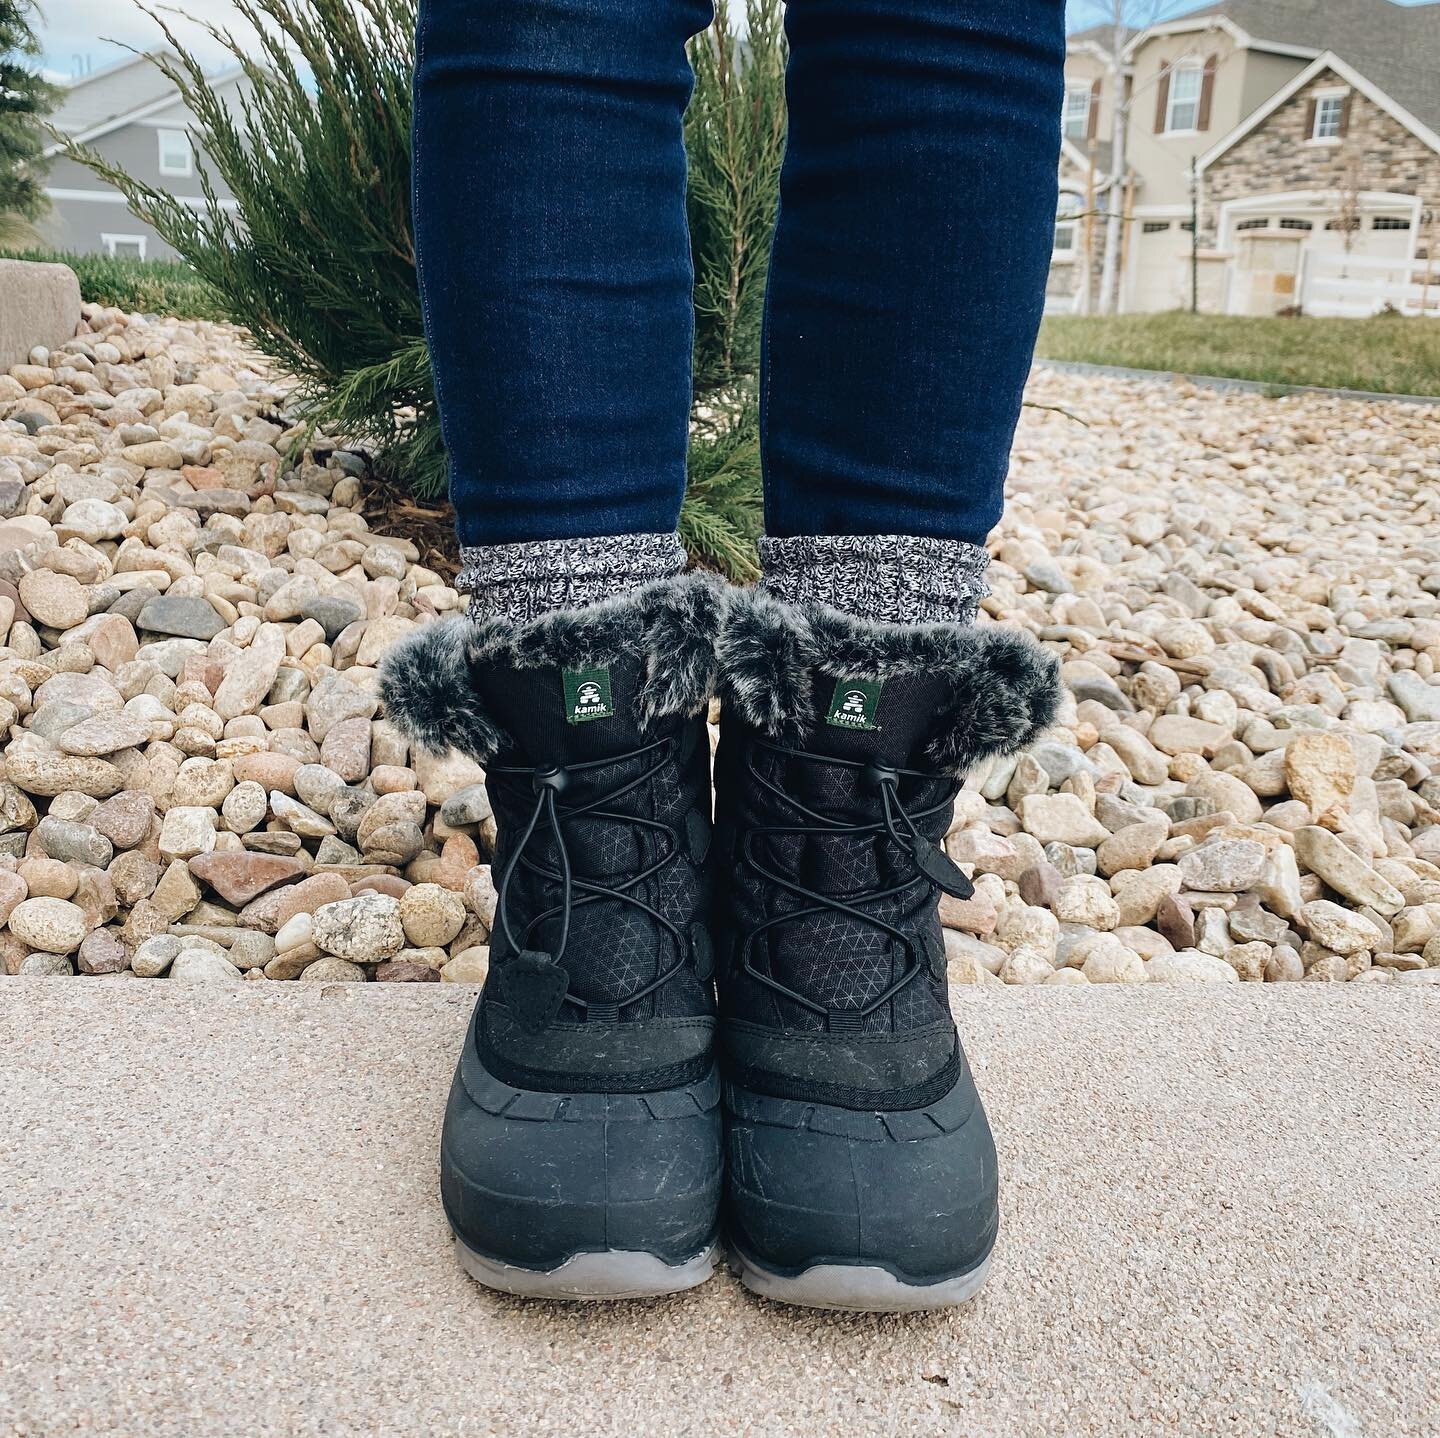 #WorldVeganDayChallenge Day 5⁠⠀
Category: Vegan Fashion⁠⠀
⁠⠀
❄️ Vegan Winter Boots! 🥾⁠⠀
⁠⠀
&lsquo;Going vegan&rsquo; not only means leaving animals off your plate but also means leaving them out of your closet.⁠⠀
⁠⠀
#noleather #nowool #nosilk #nodow